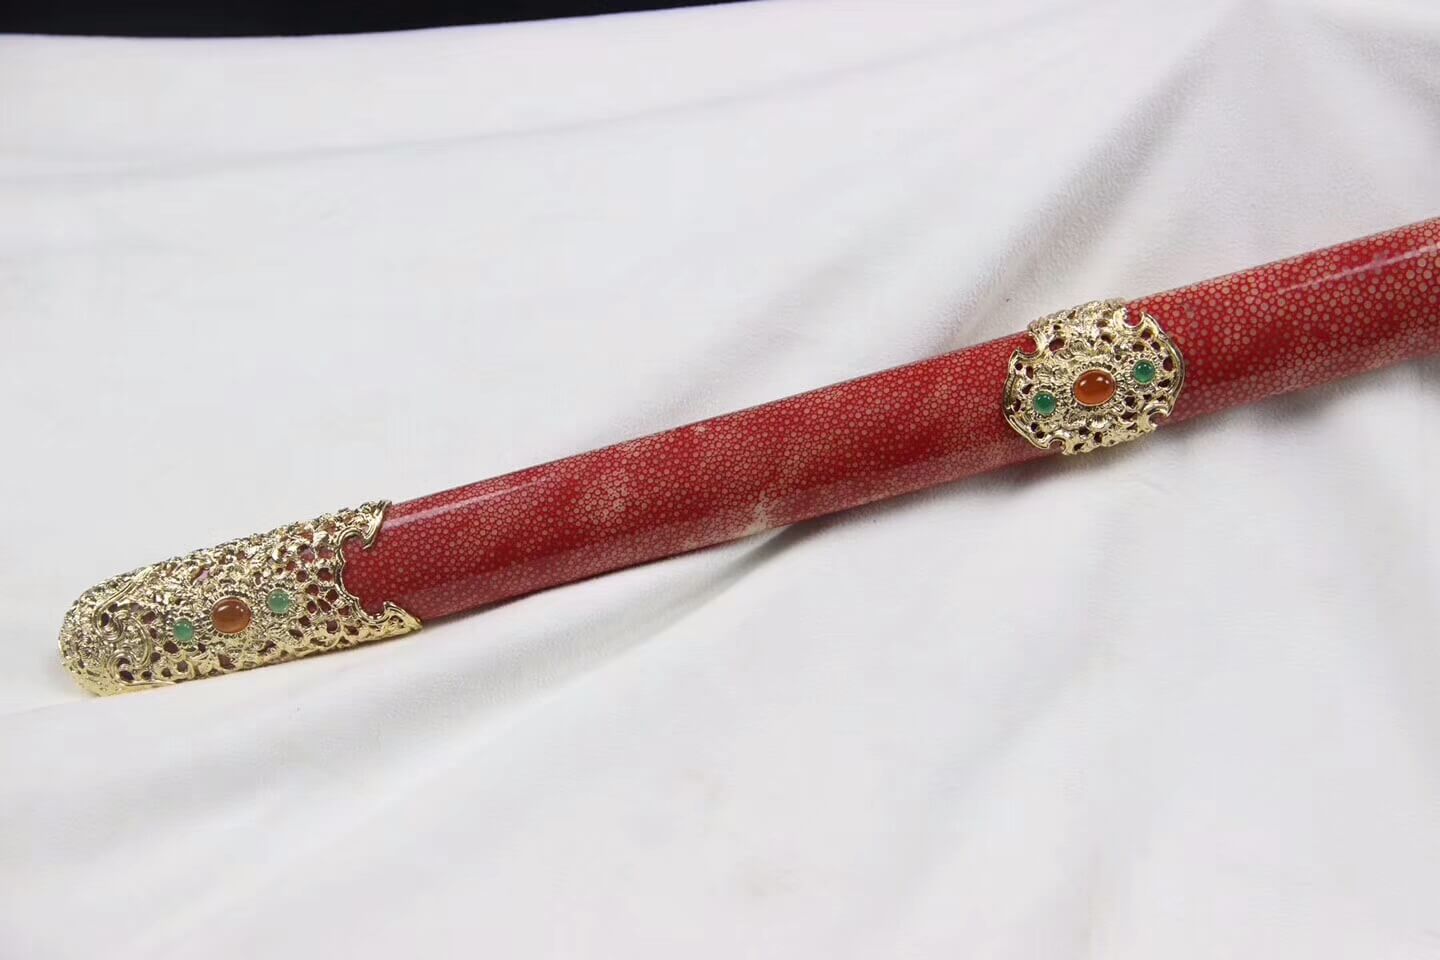 Longquan sword,Folded steel,Red skin scabbard,Brass fitting,Full tang - Chinese sword shop